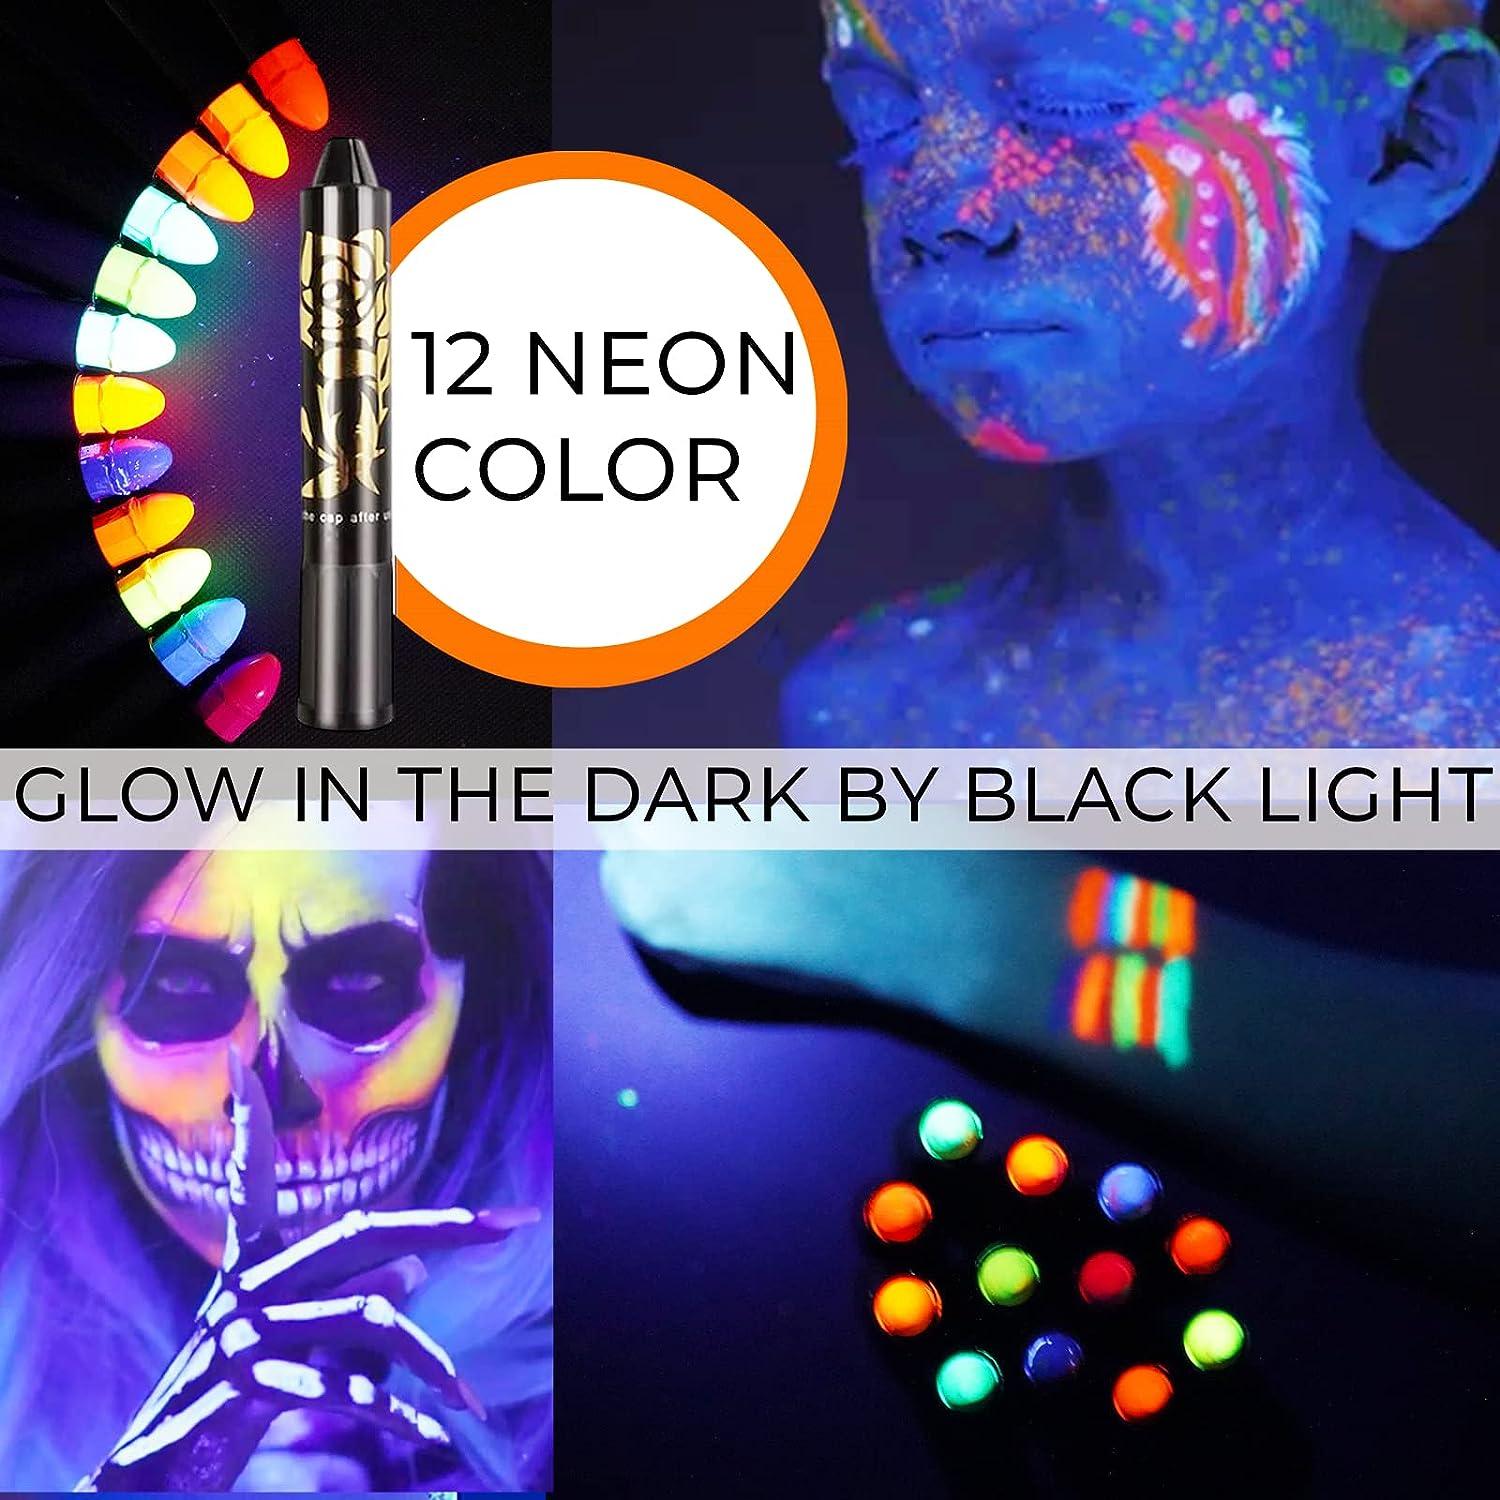 Moon Glow - Neon UV Paint Stick Body Crayon for the Face & Body – Black